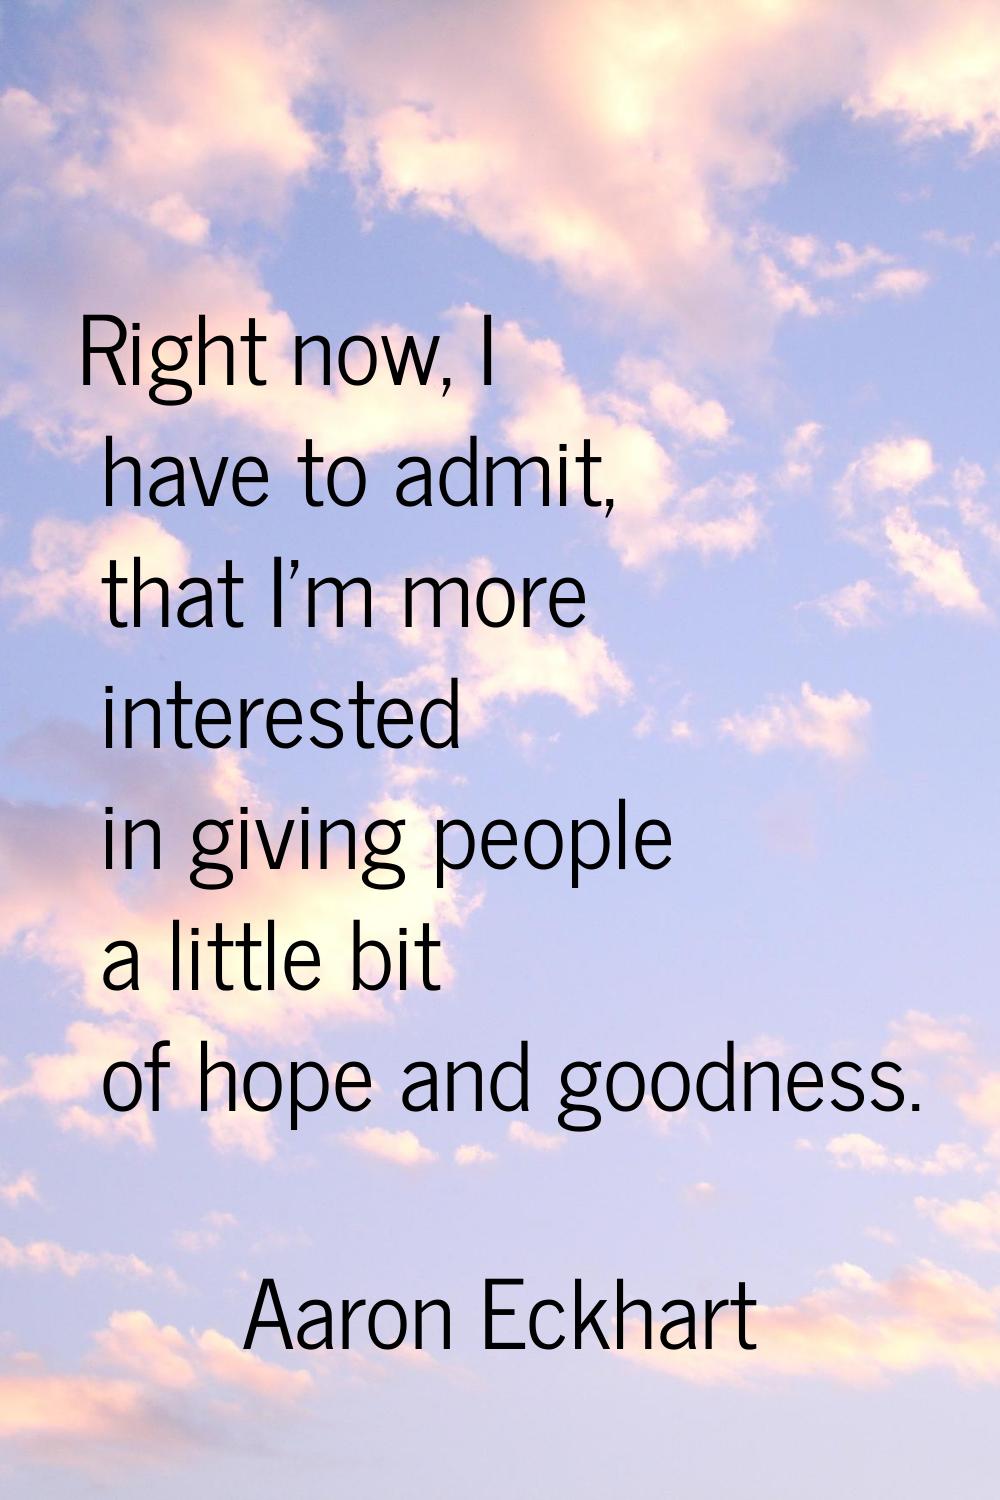 Right now, I have to admit, that I'm more interested in giving people a little bit of hope and good